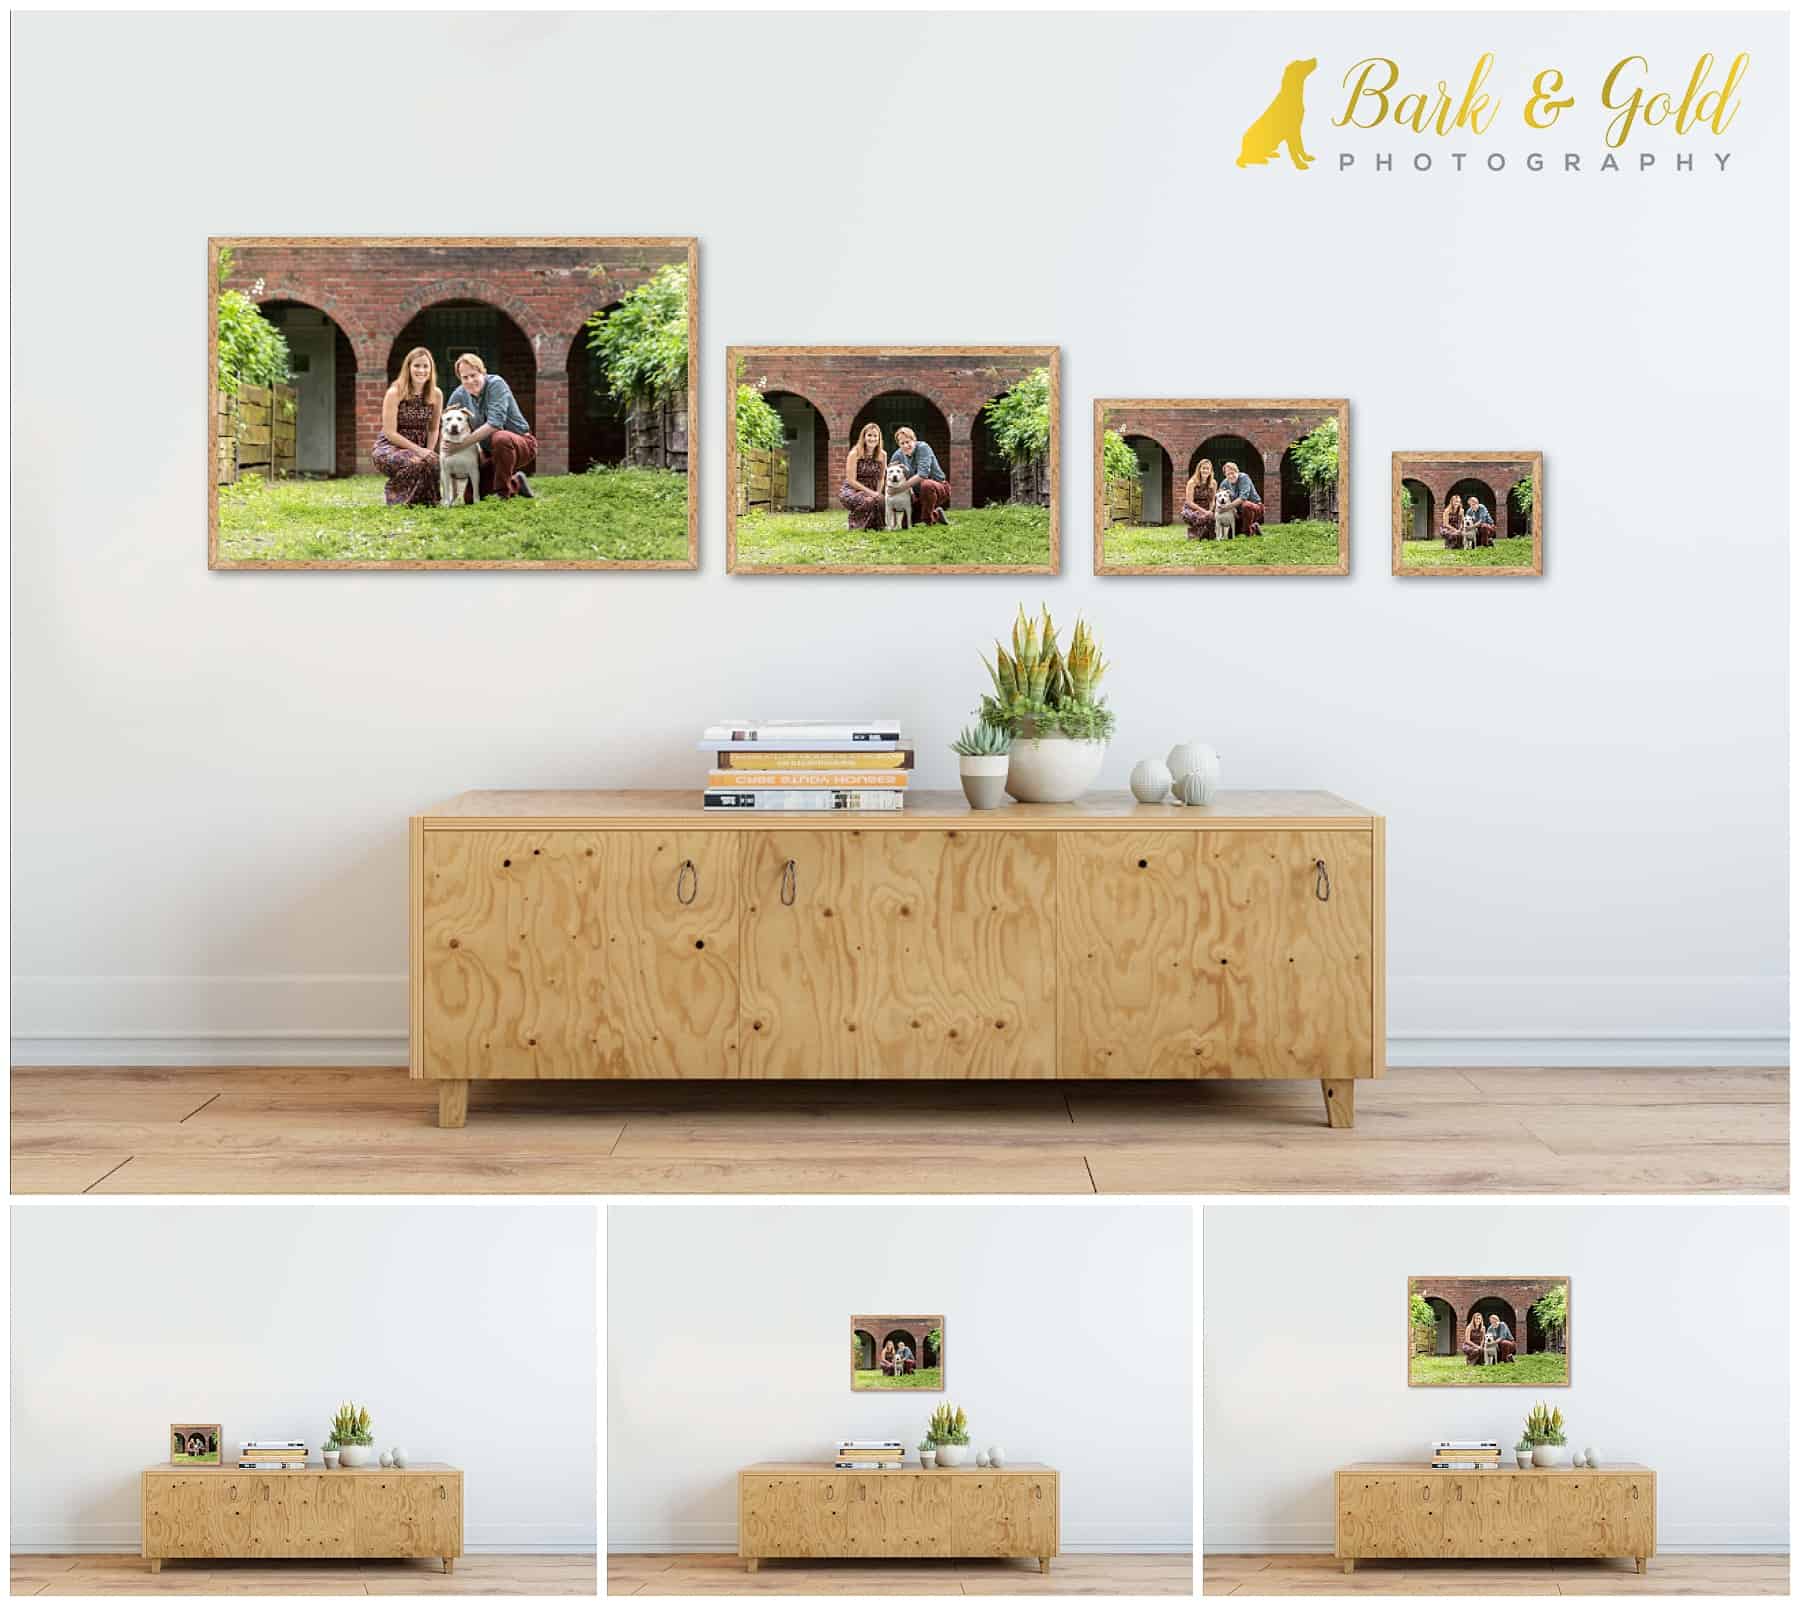 various signature wall art sizes shown above an entryway table